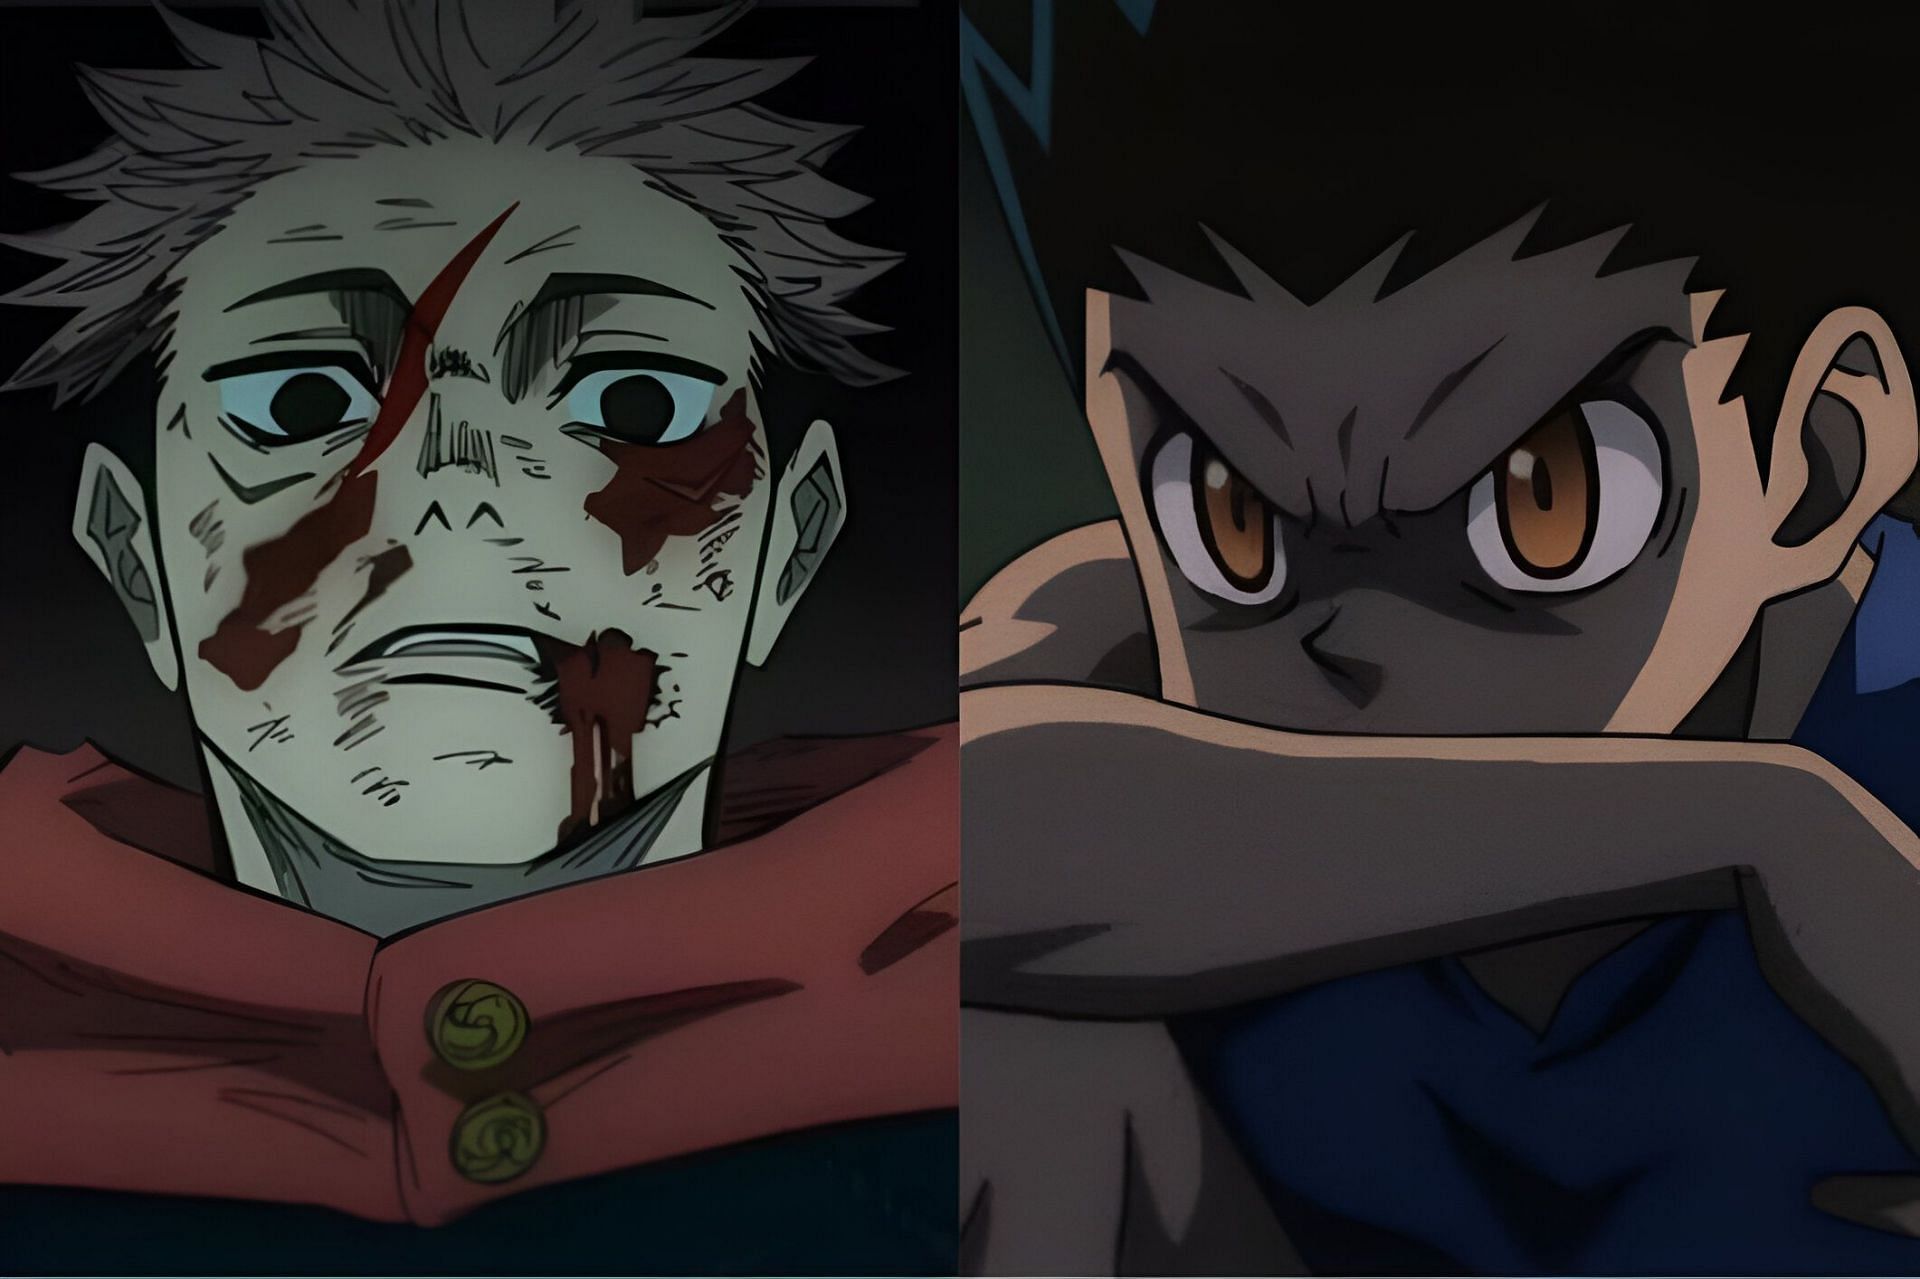 Yuji (left) and Gon (right) as seen in their anime series (Image via MAPPA &amp; BONES)